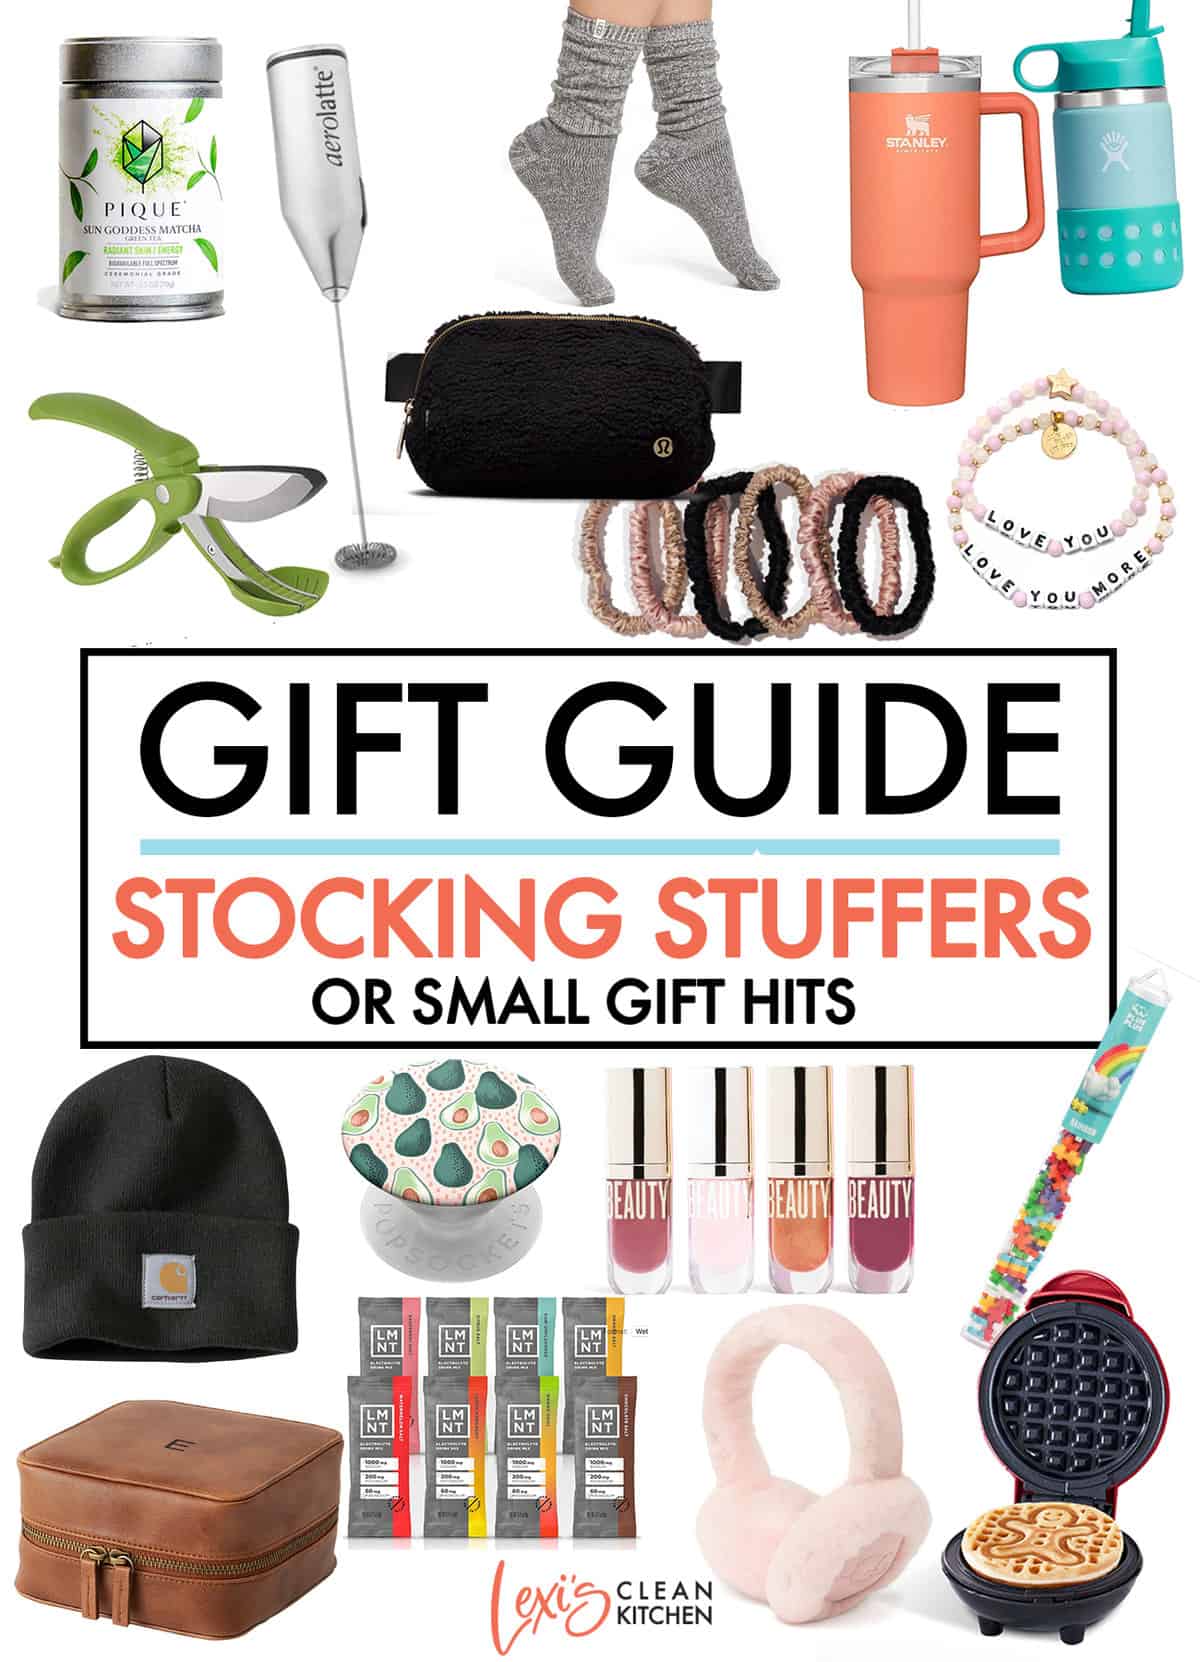 Gift Guide 2021: Give the Gift of Clean